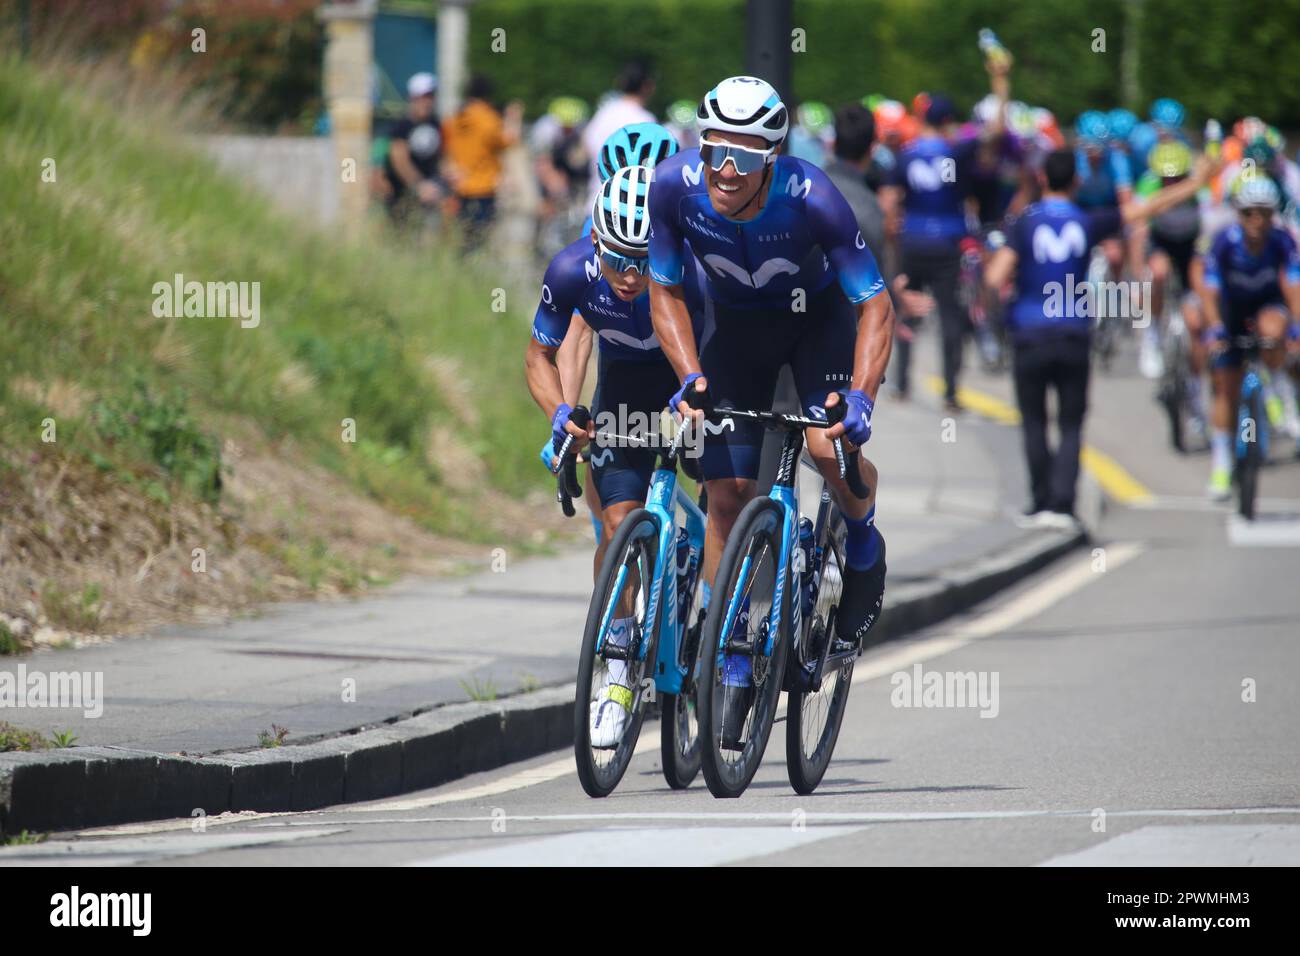 Oviedo, Spain. 30th Apr, 2023. Movistar Team rider Alberto Torres (R) followed by Einer Augusto Rubio (Movistar Team, L) leading a group during the 3rd stage of the Vuelta a Asturias 2023 between Cangas del Narcea and Oviedo, on April 30, 2023, in Oviedo, Spain. (Photo by Alberto Brevers/Pacific Press) Credit: Pacific Press Media Production Corp./Alamy Live News Stock Photo